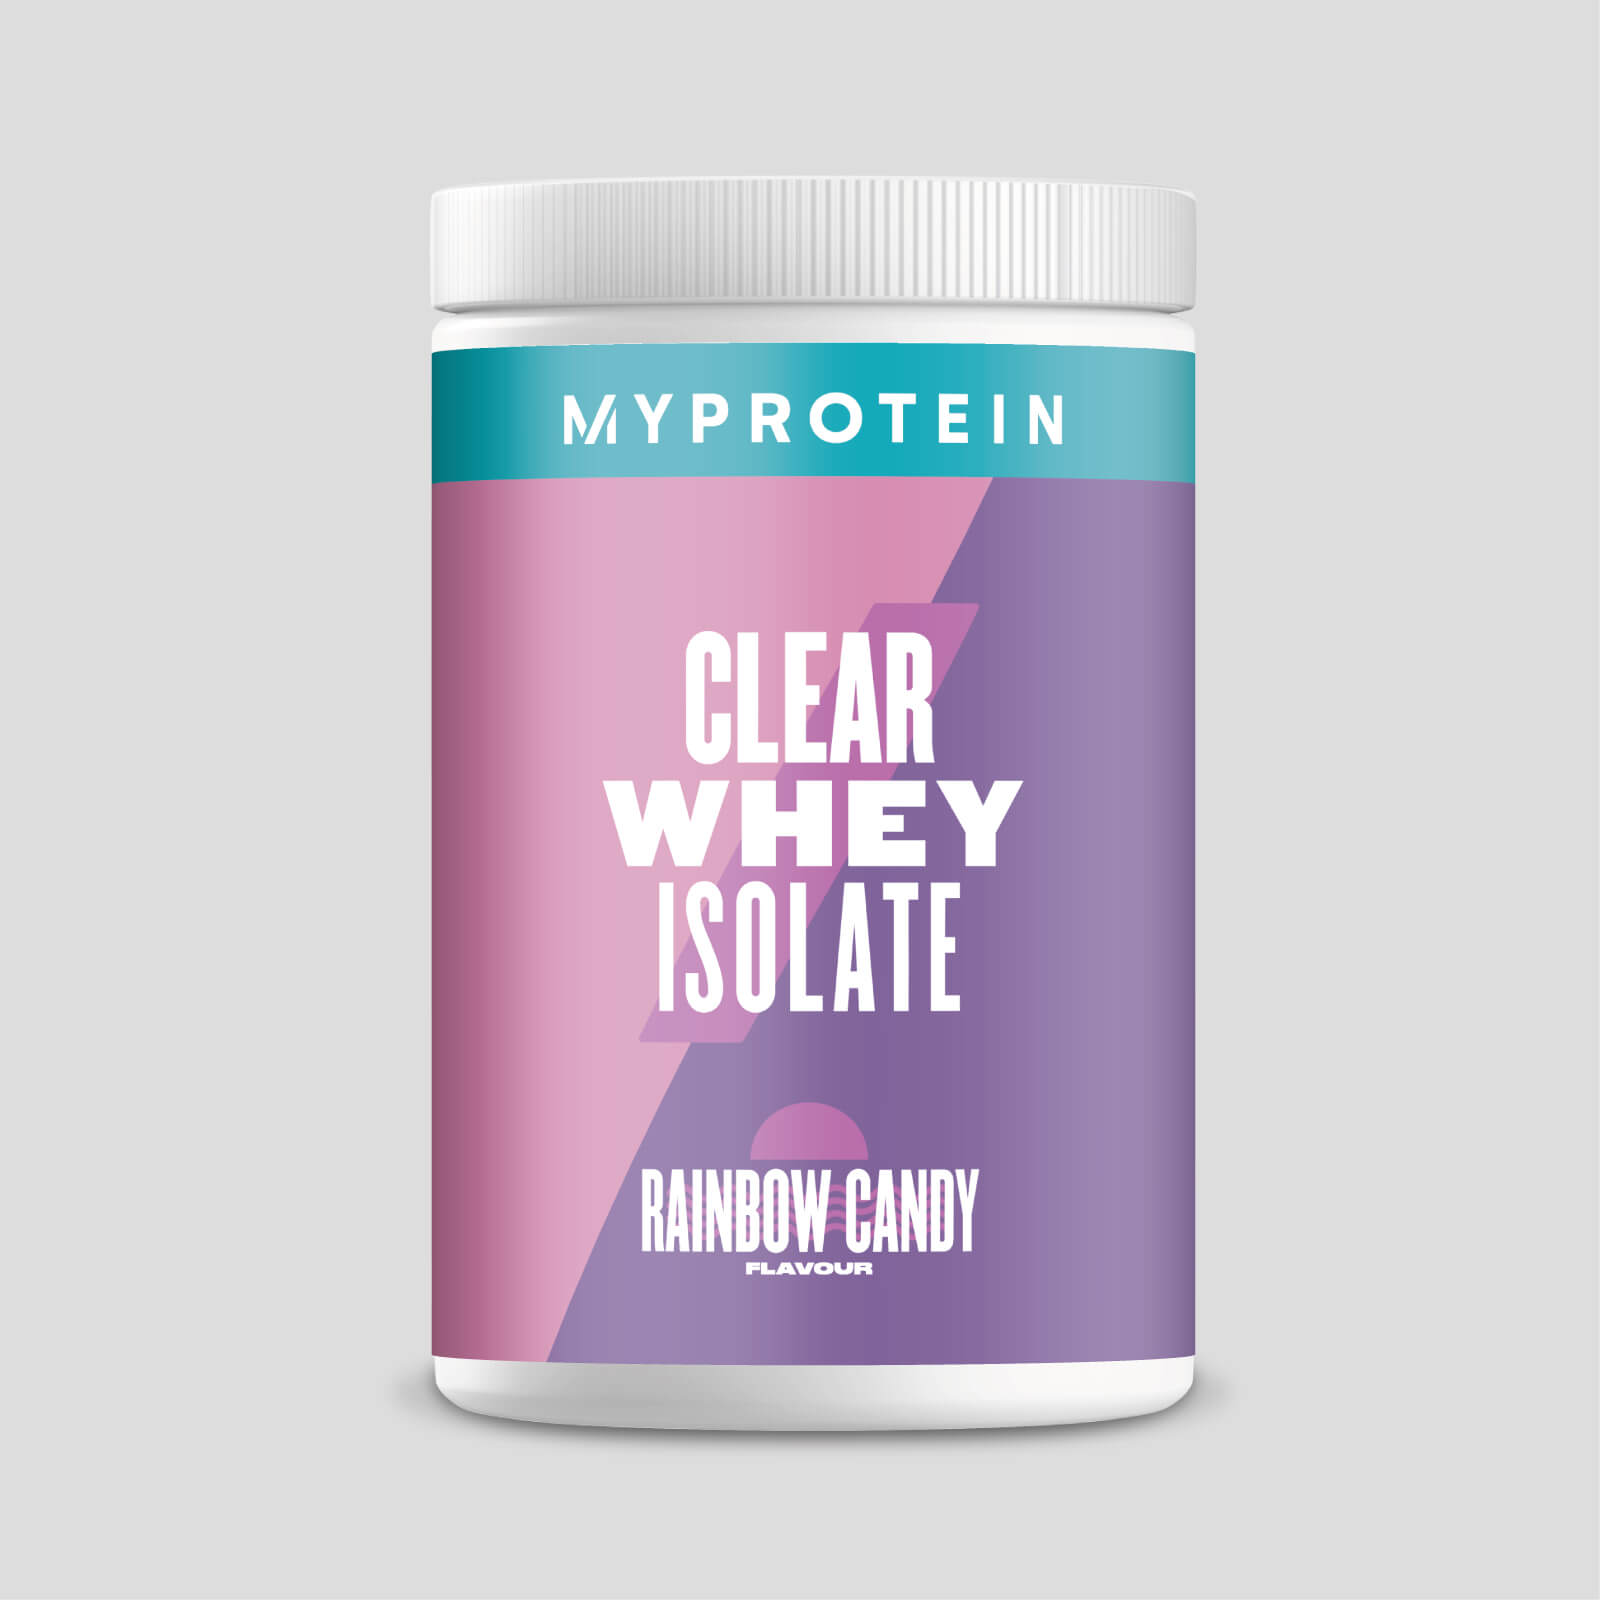 Myprotein Clear Whey Isolate - 35servings - Doce de arco iris